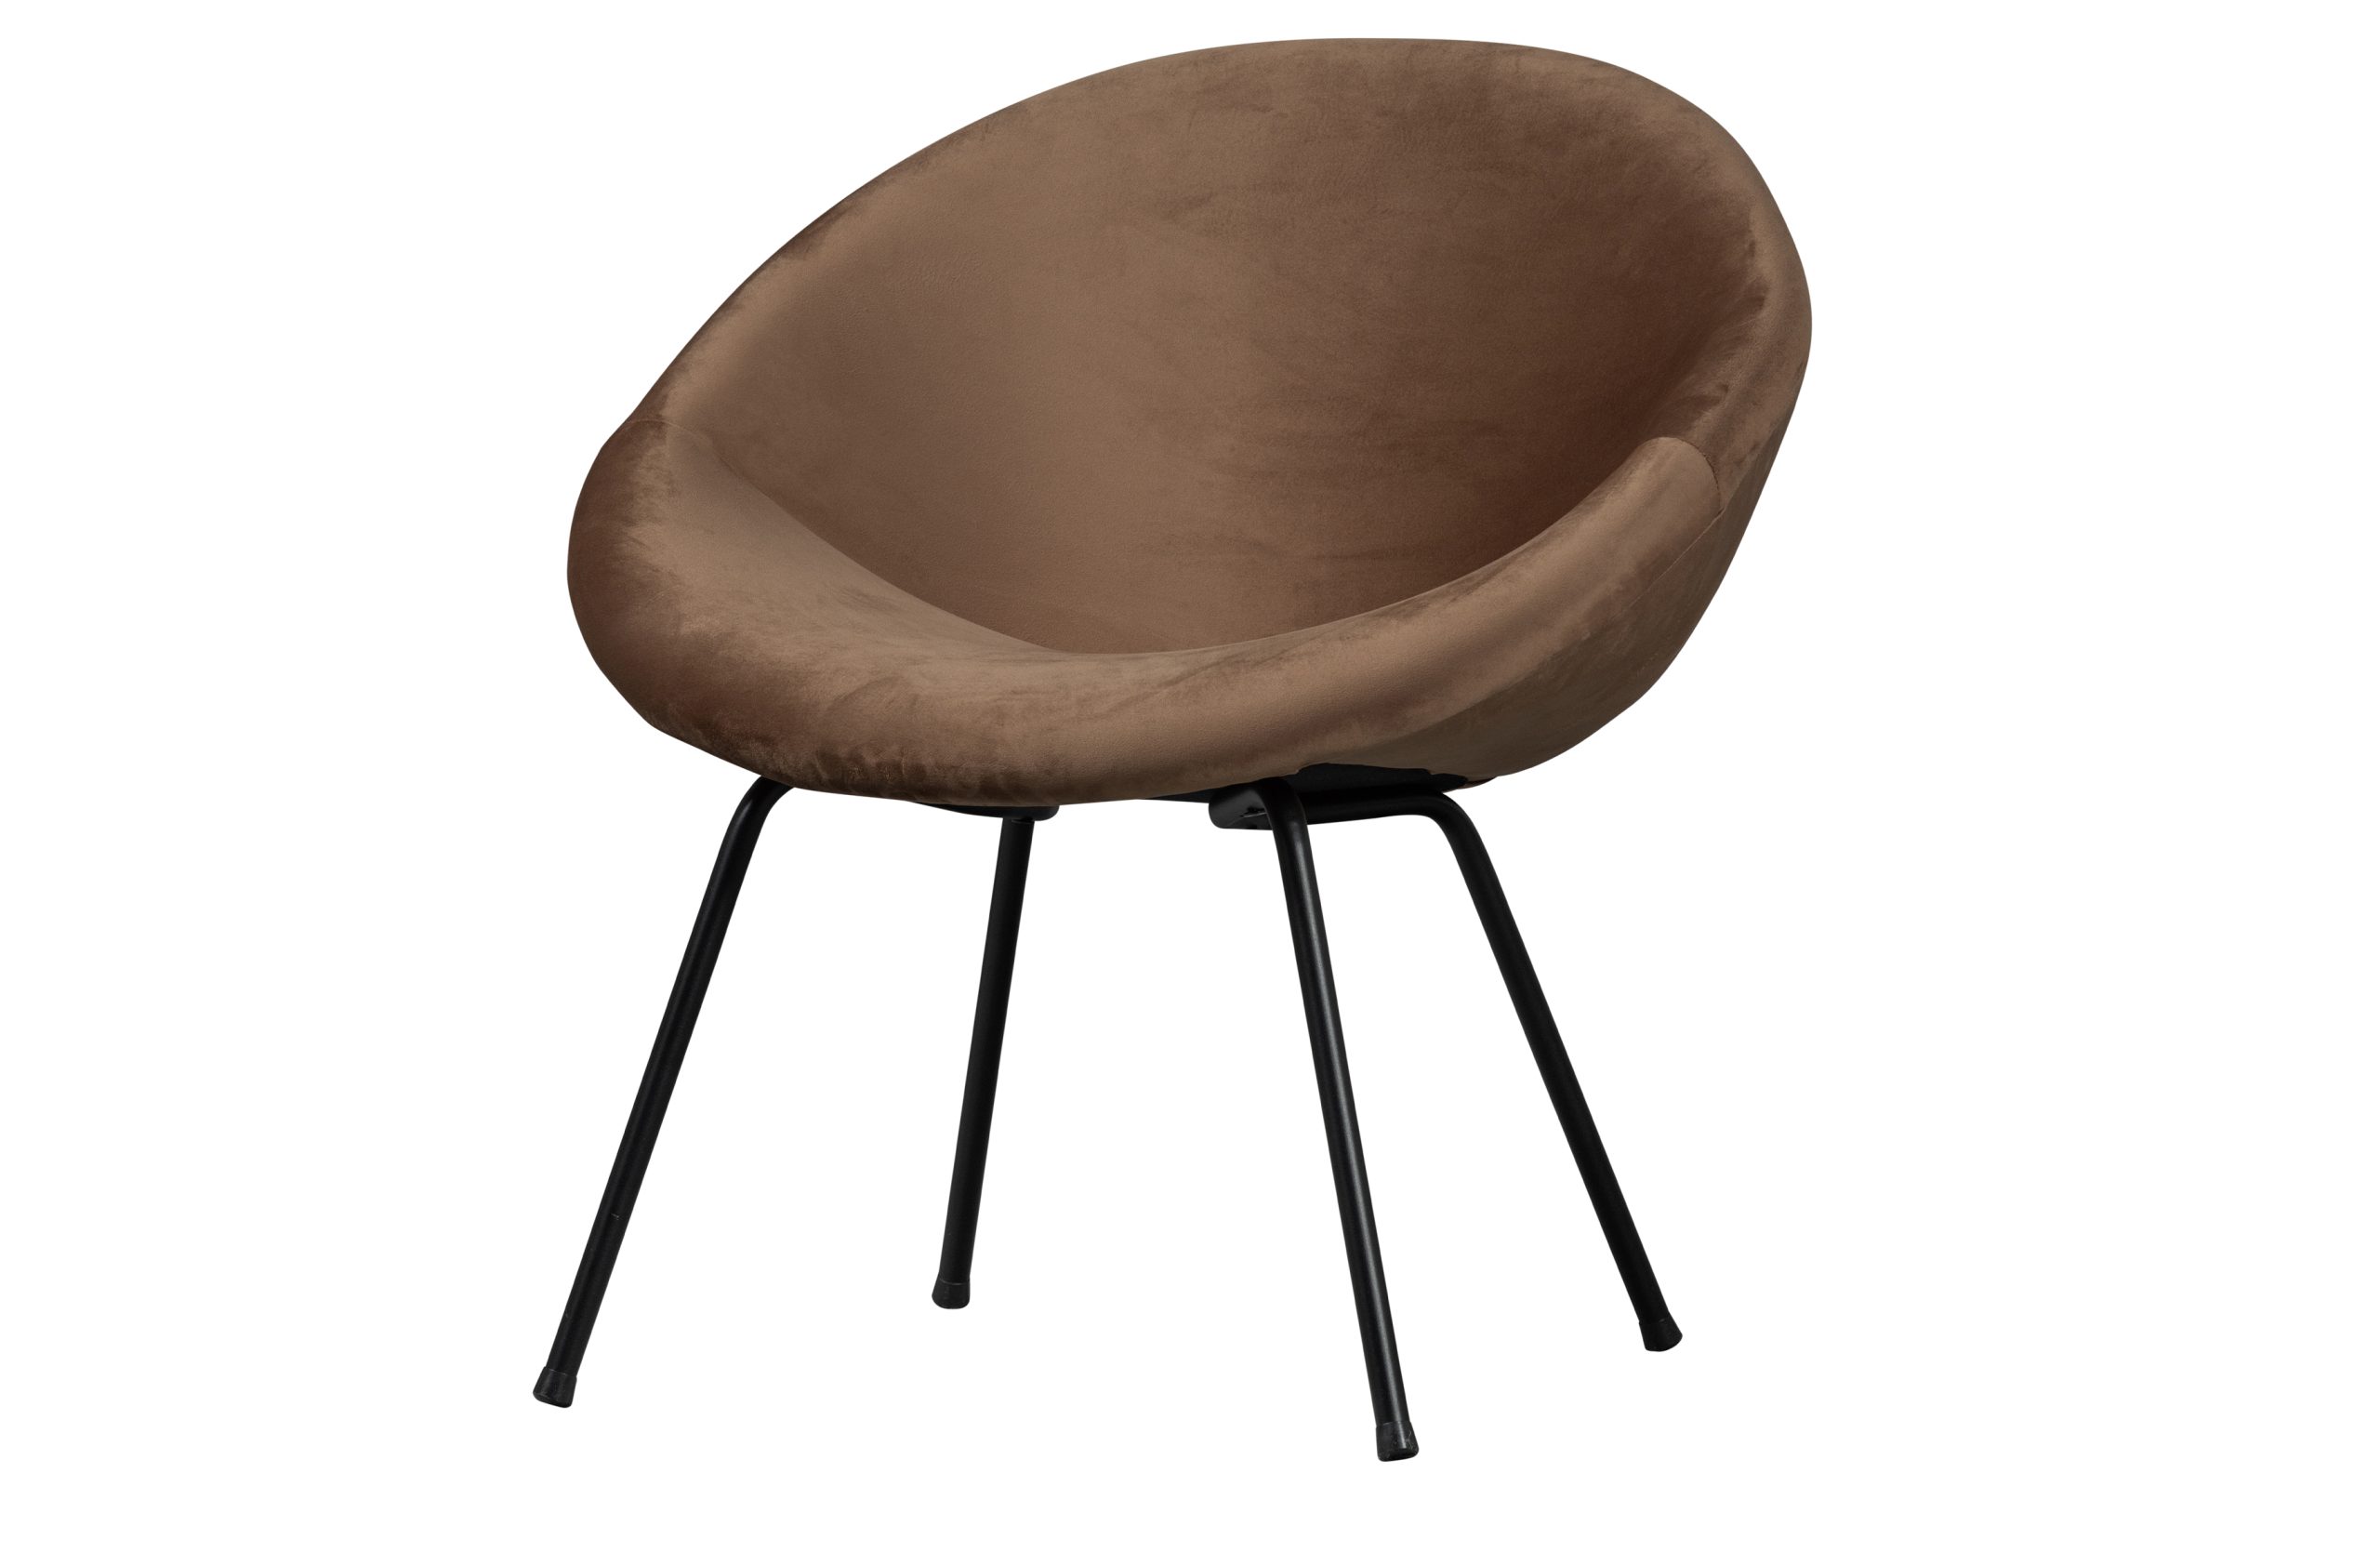 Moly Fauteuil Velvet Toffee